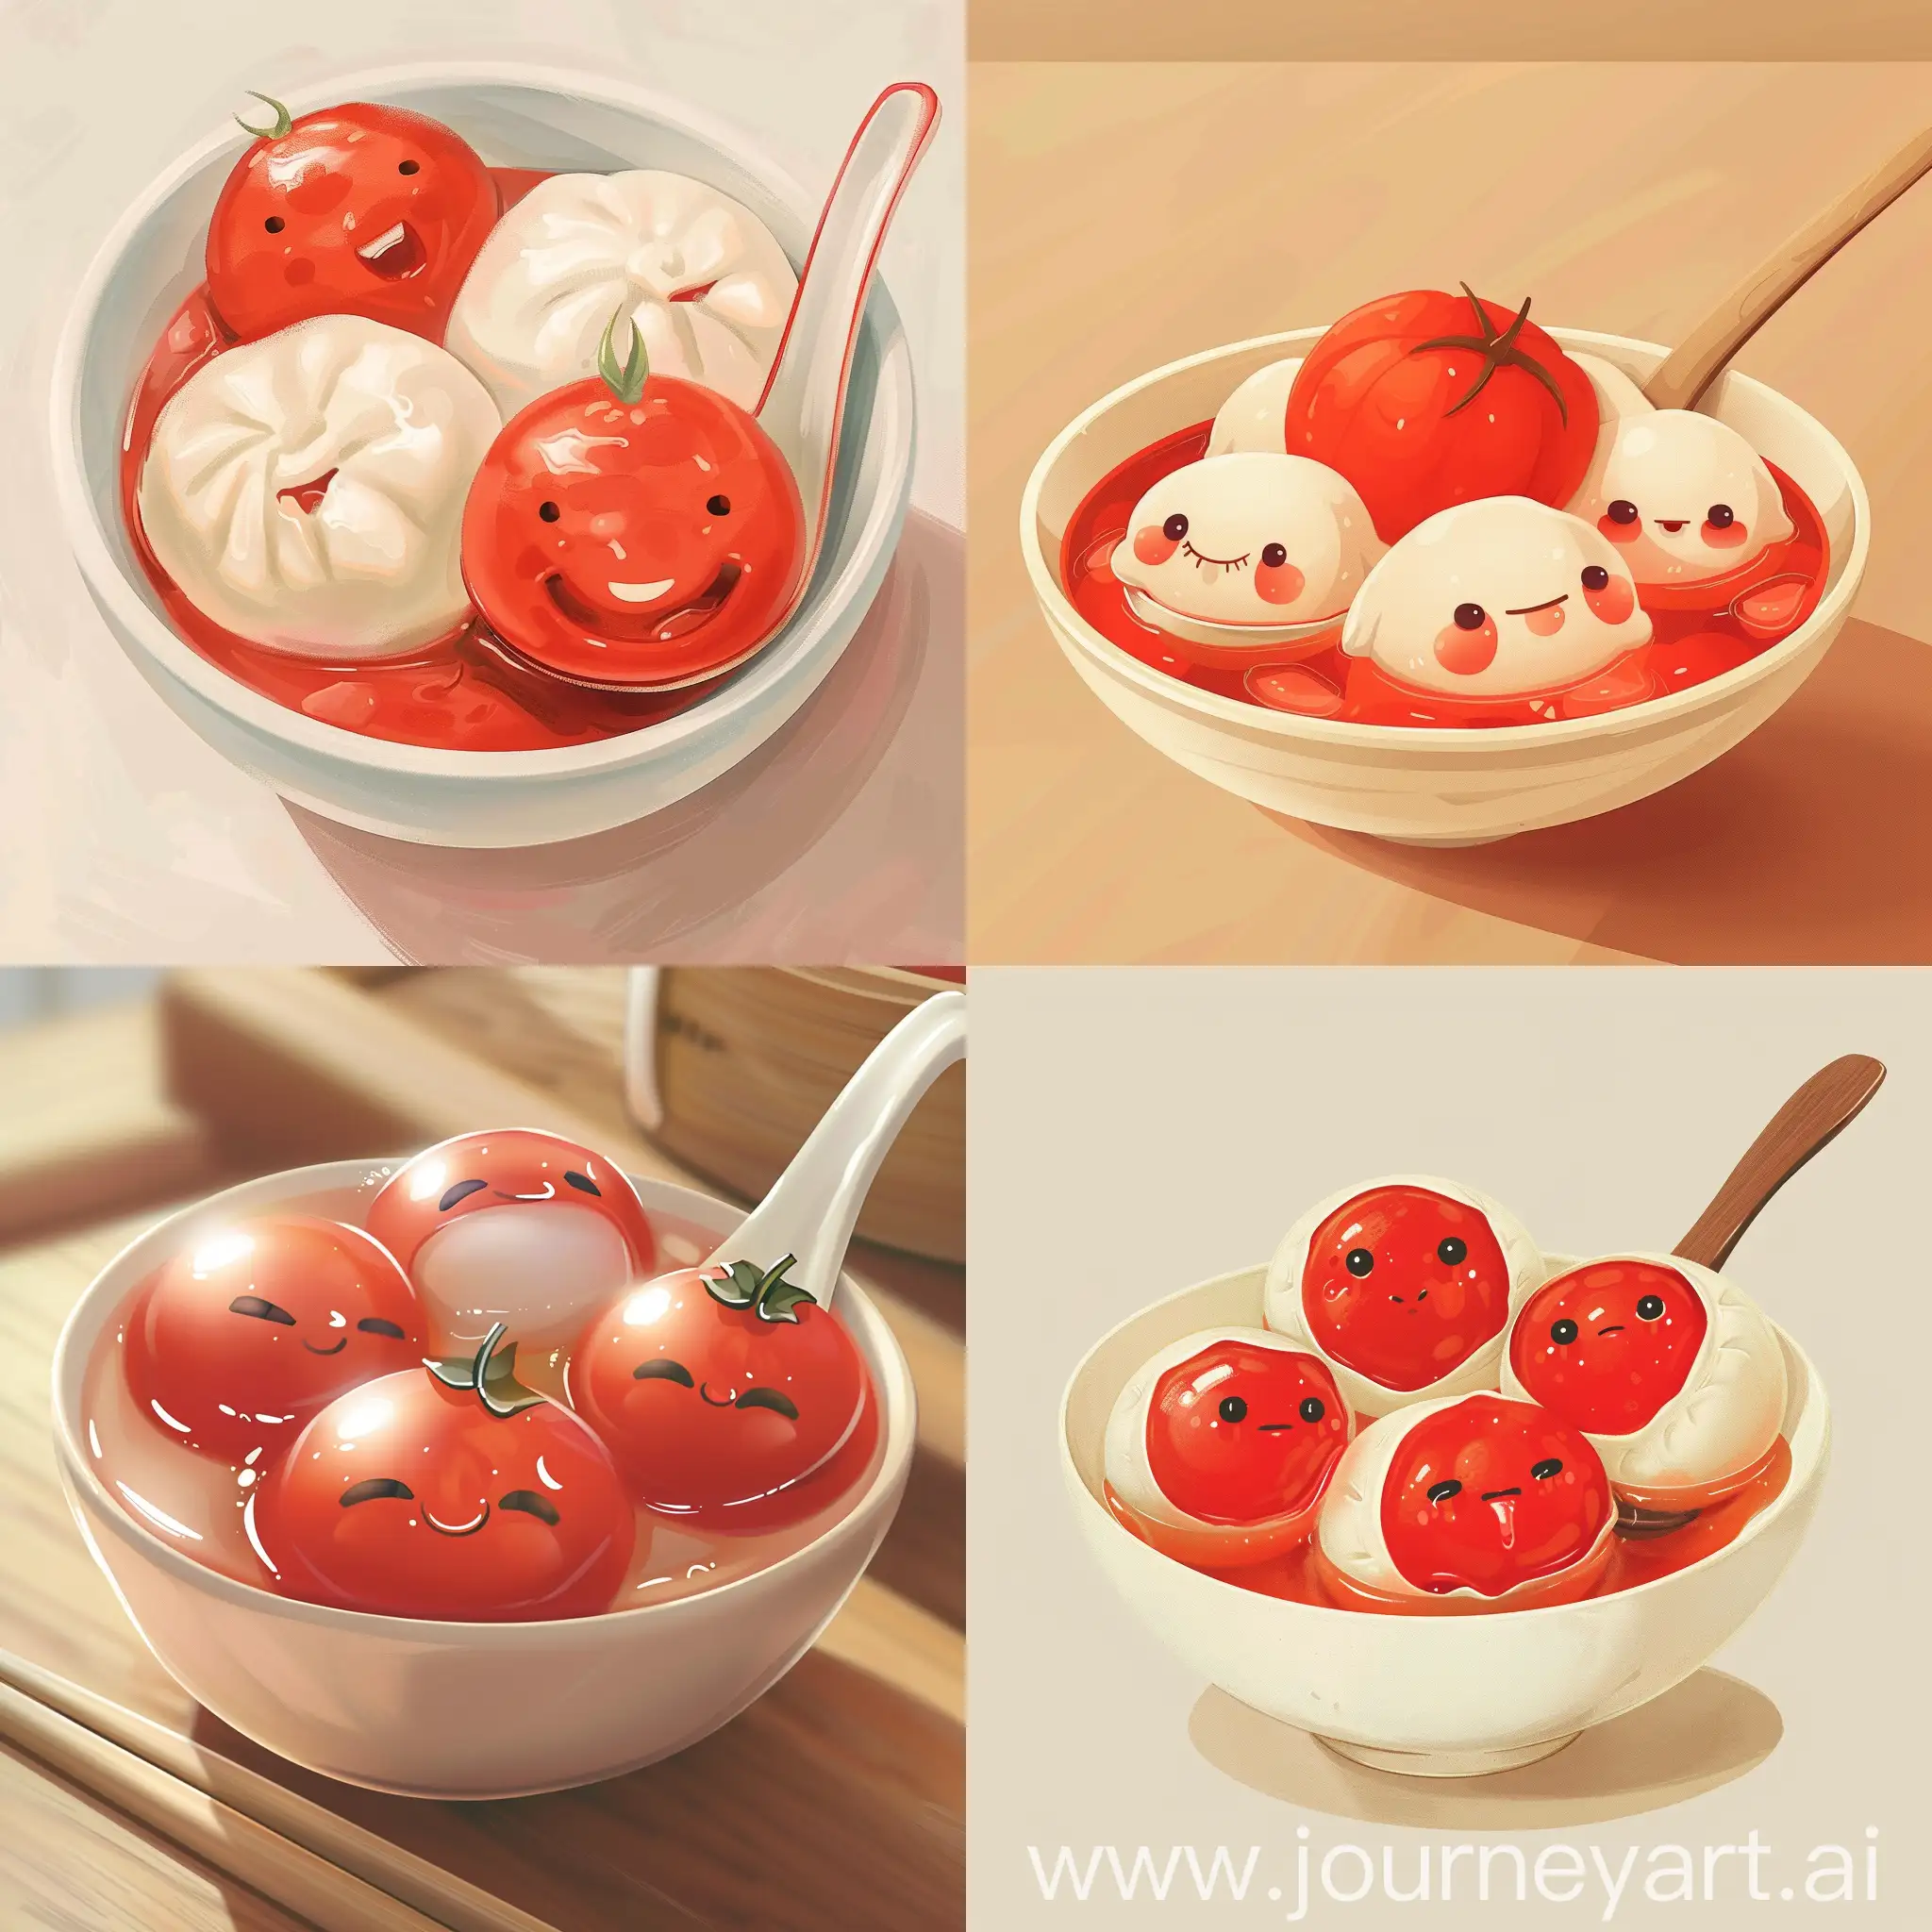 Adorable-TomatoShaped-Dumplings-Wholesome-Illustration-of-Personified-Delights